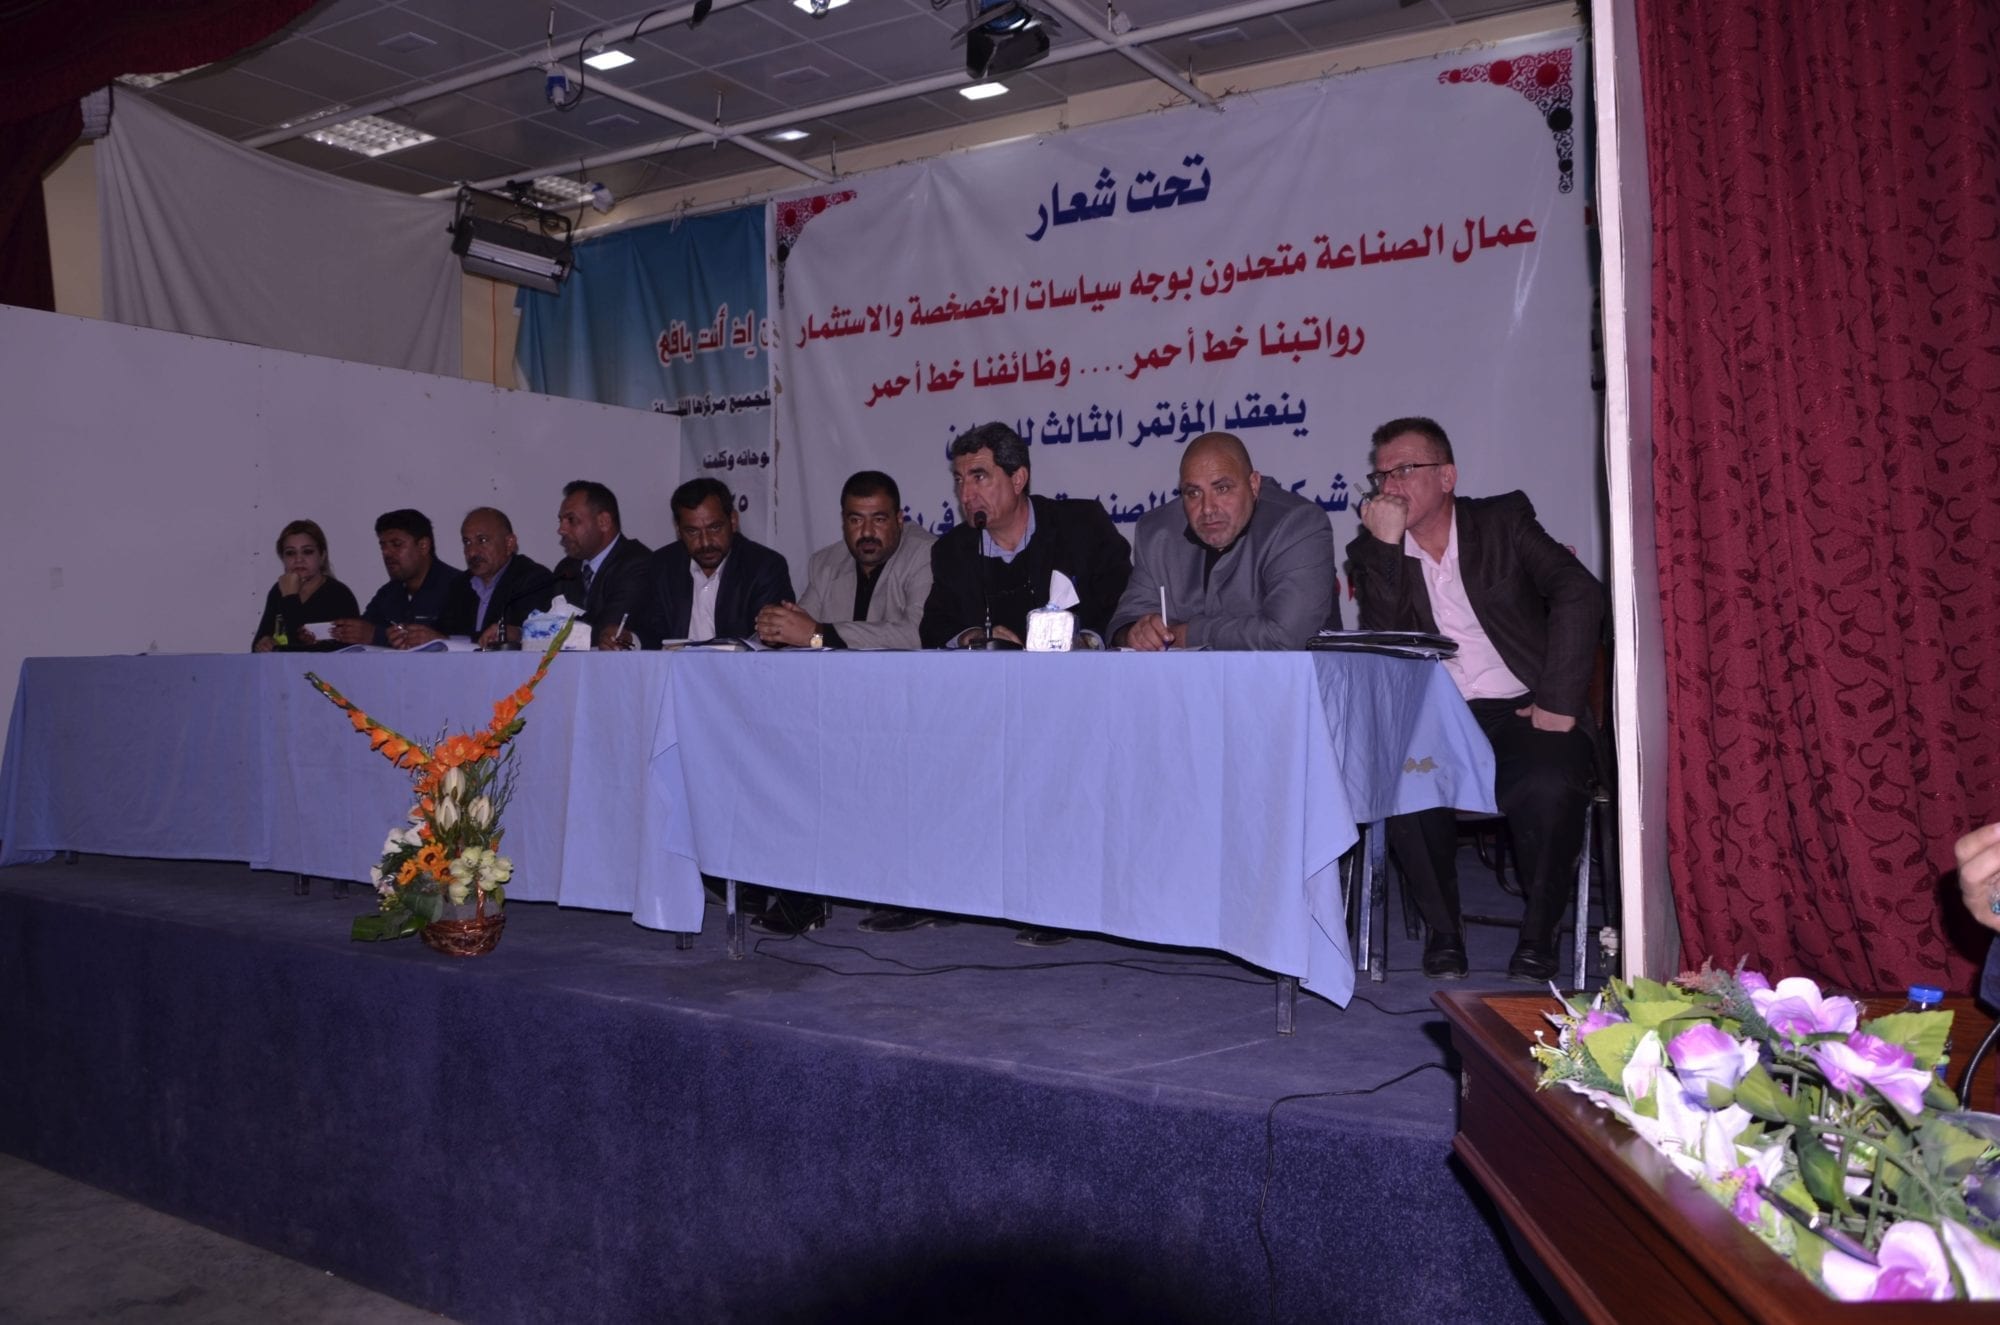 In Iraq, Public-Sector Workers Stand up for Their Rights